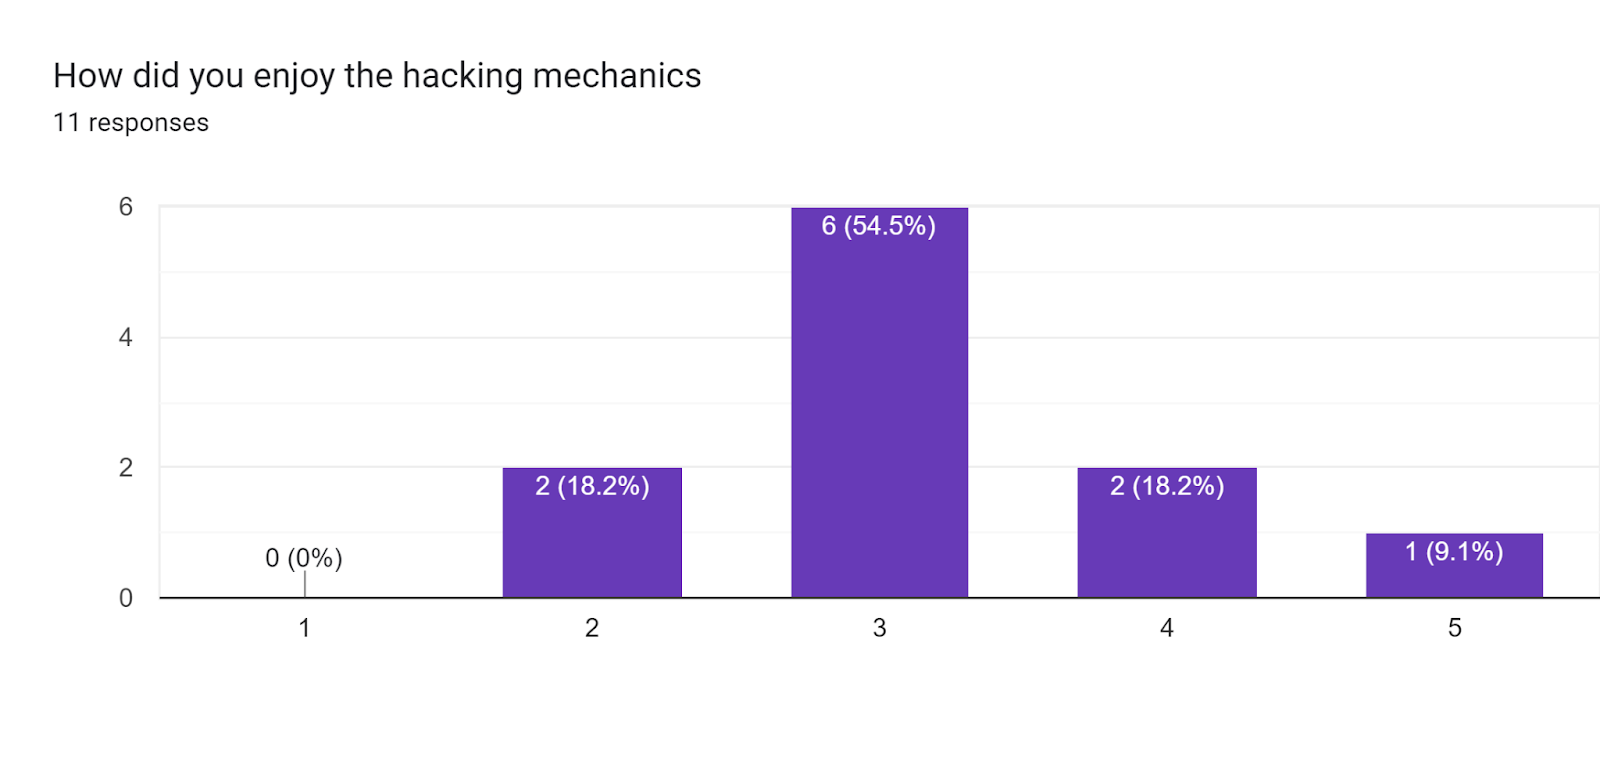 Forms response chart. Question title: How did you enjoy the hacking mechanics. Number of responses: 11 responses.